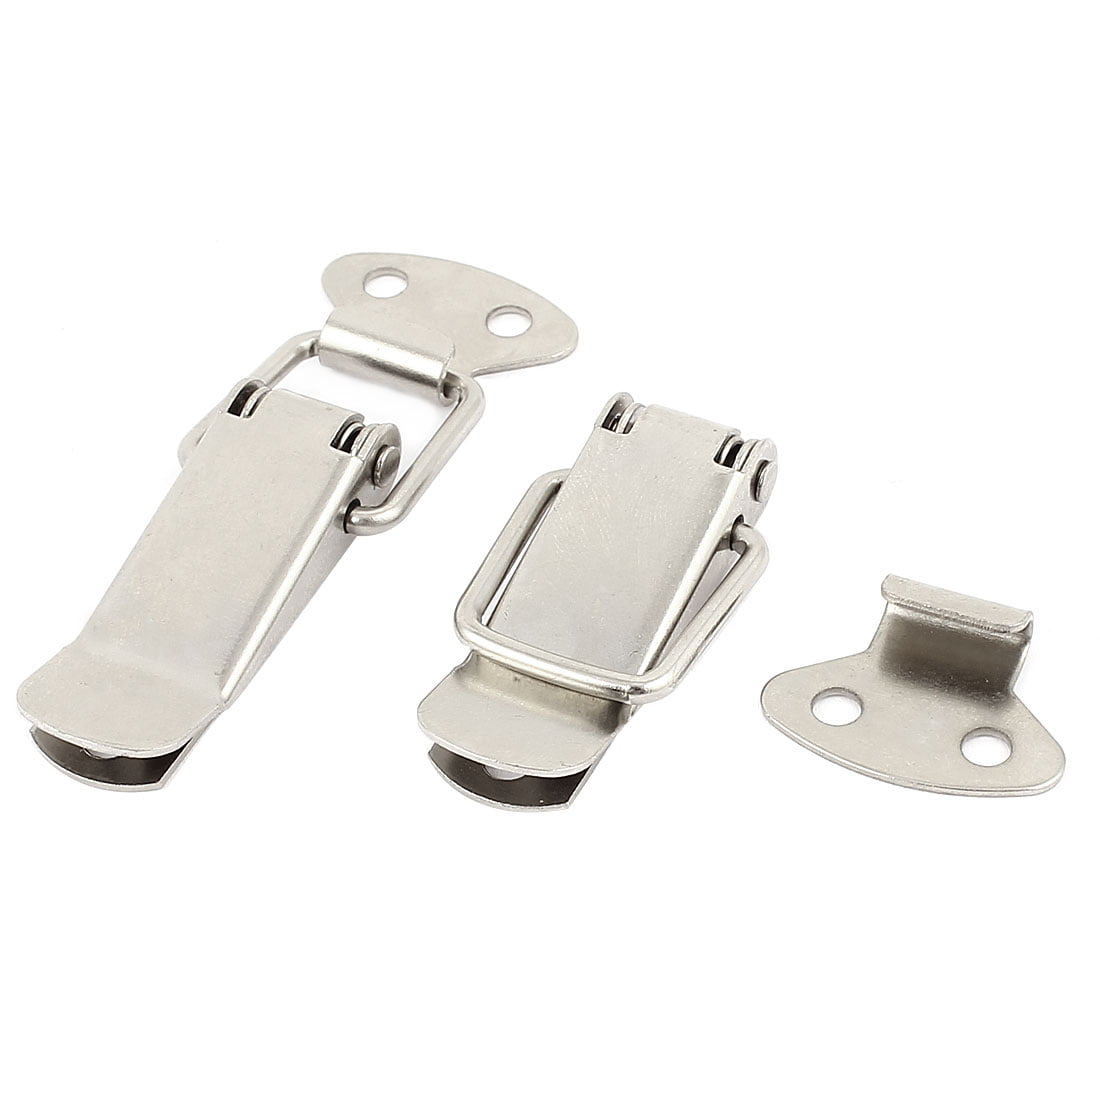 Cabinet Safety Stainless Steel Spring Toggle Straight Loop Latch Hasp 2pcs 